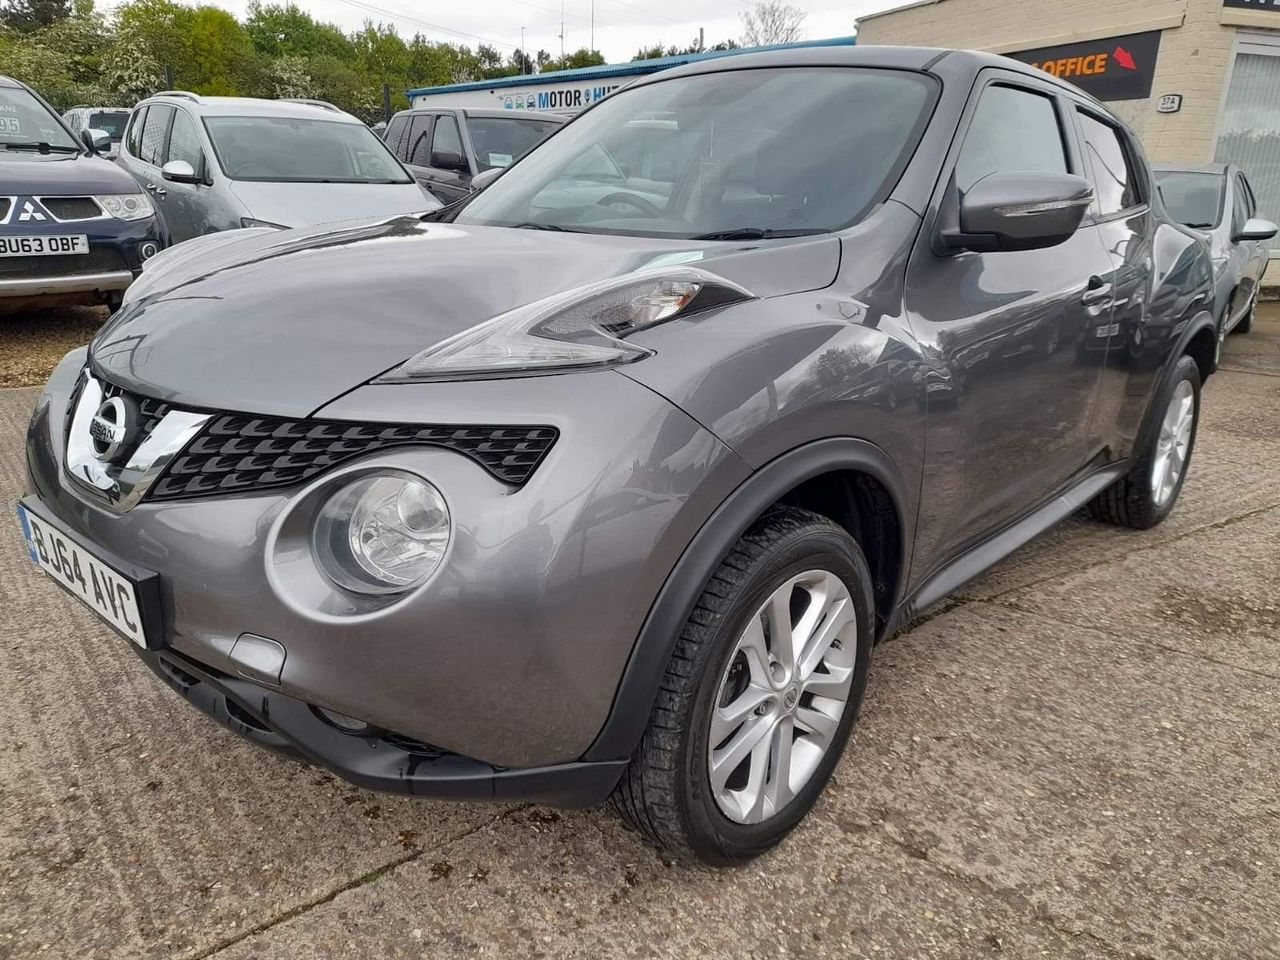 2014 Nissan Juke 1.5 dCi 8v Acenta Euro 5 (s/s) 5dr - Picture 10 of 48